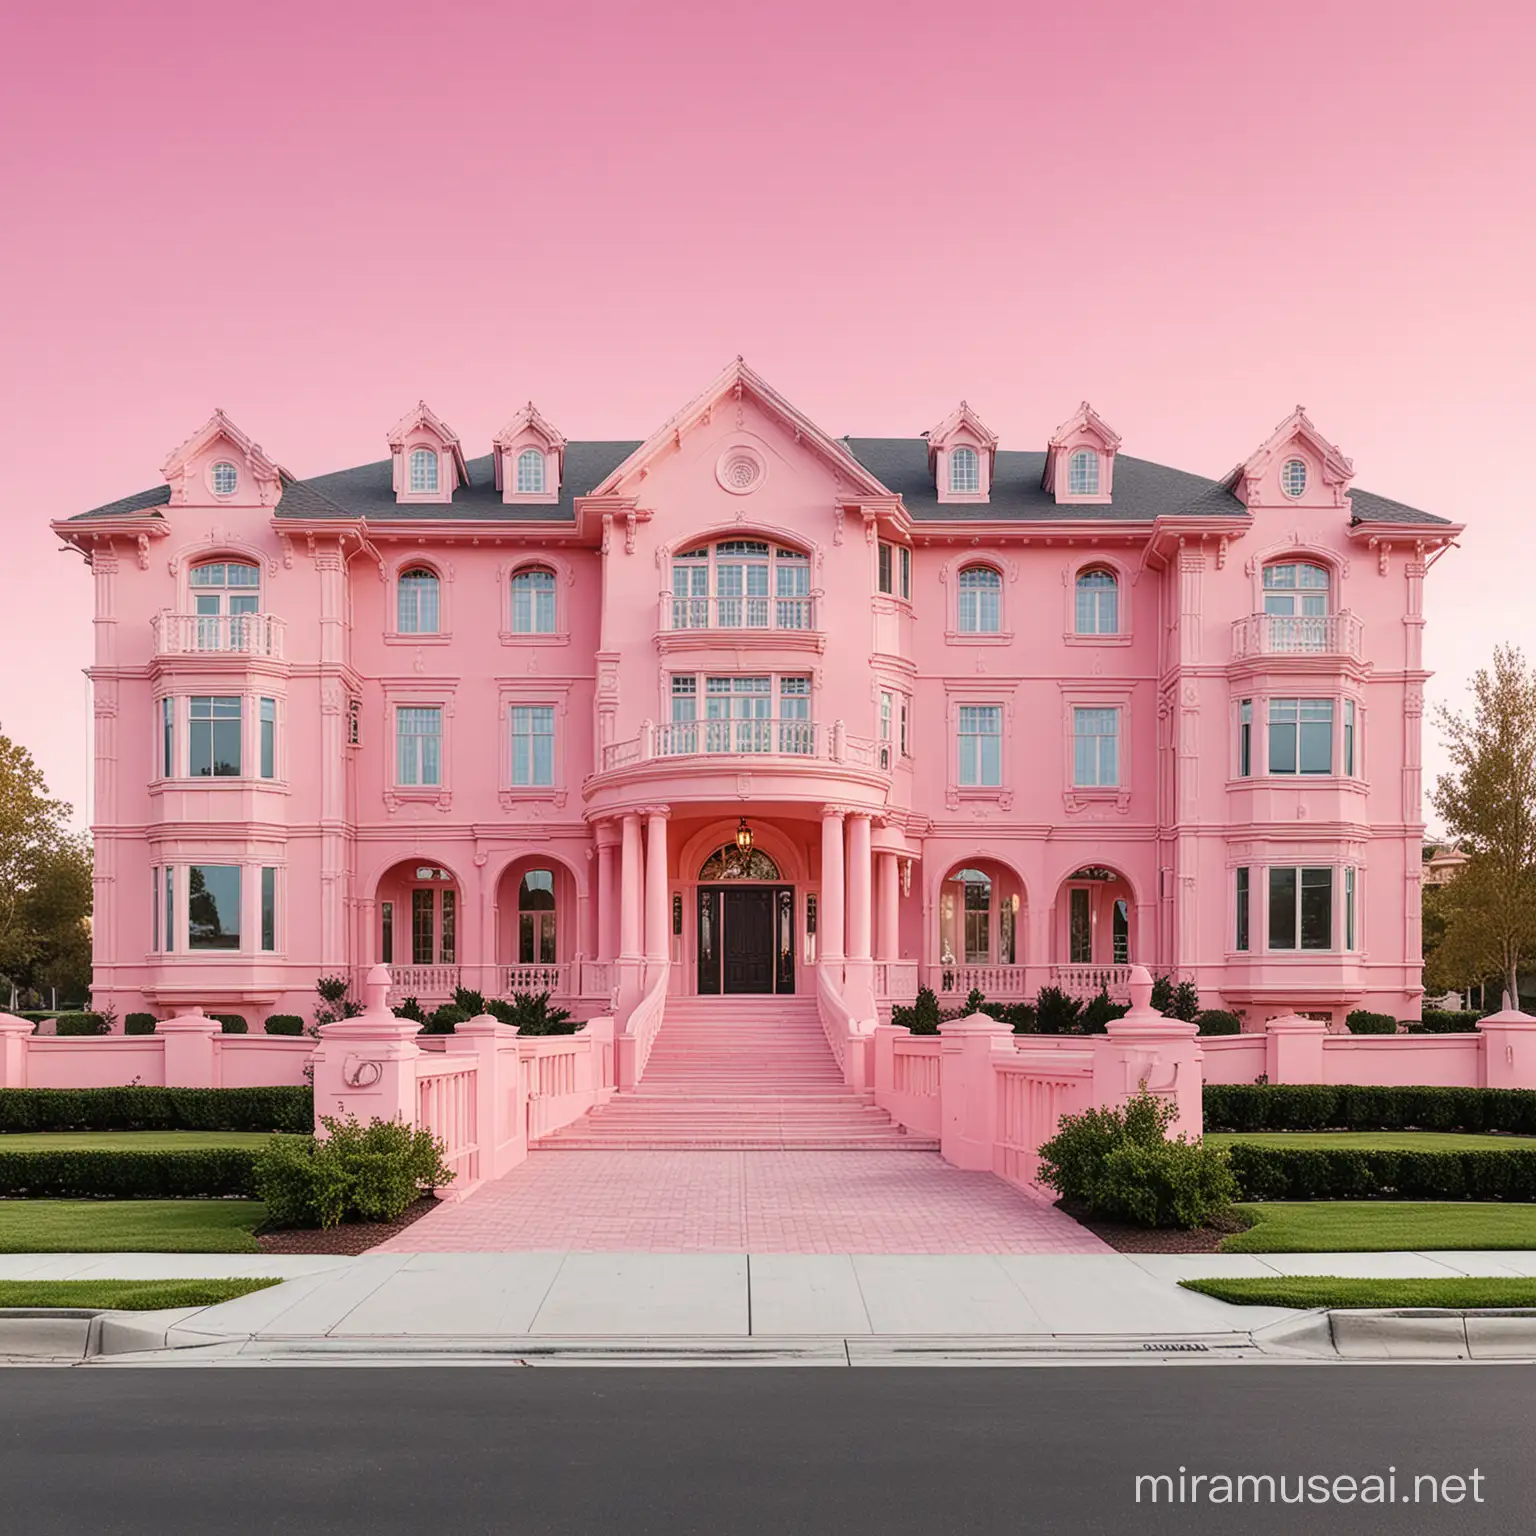 Luxurious Pink MultiStory Dream House Mansion with Driveway